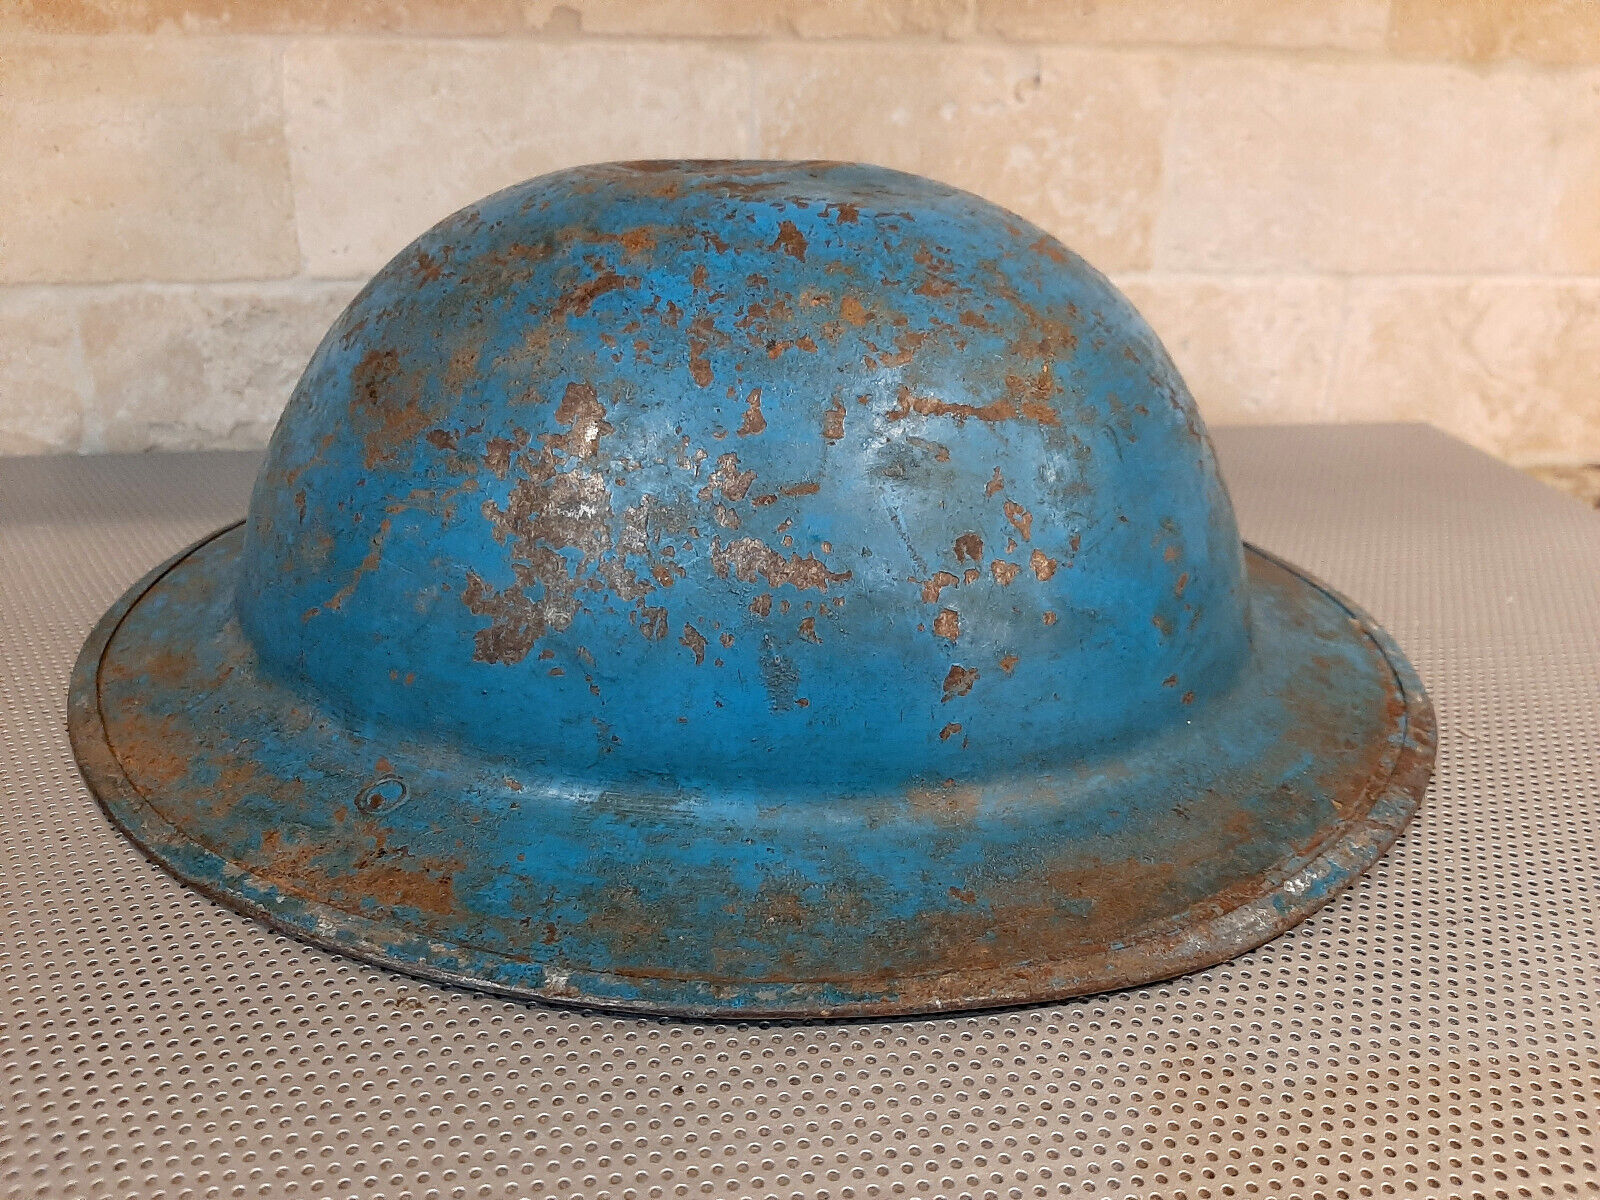 Original WW1 Doughboy Helmet Repainted in 1960s for Civil Defense Shelter Use